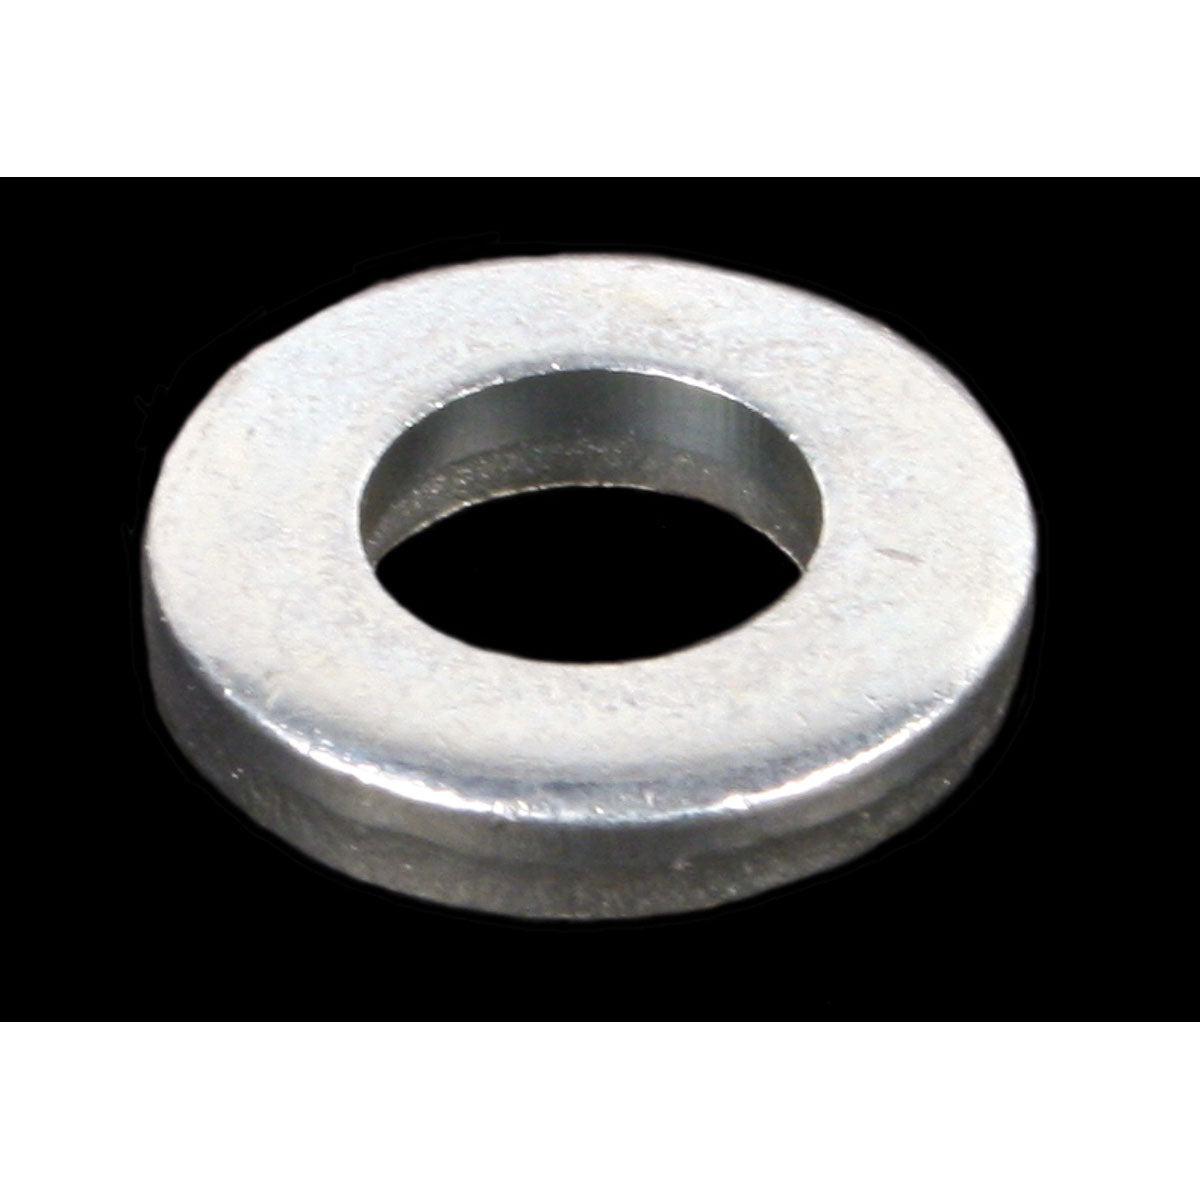 Kartech Engine Mount Slide Thick Washer 20.0 X 10.5 X 4mm Thick